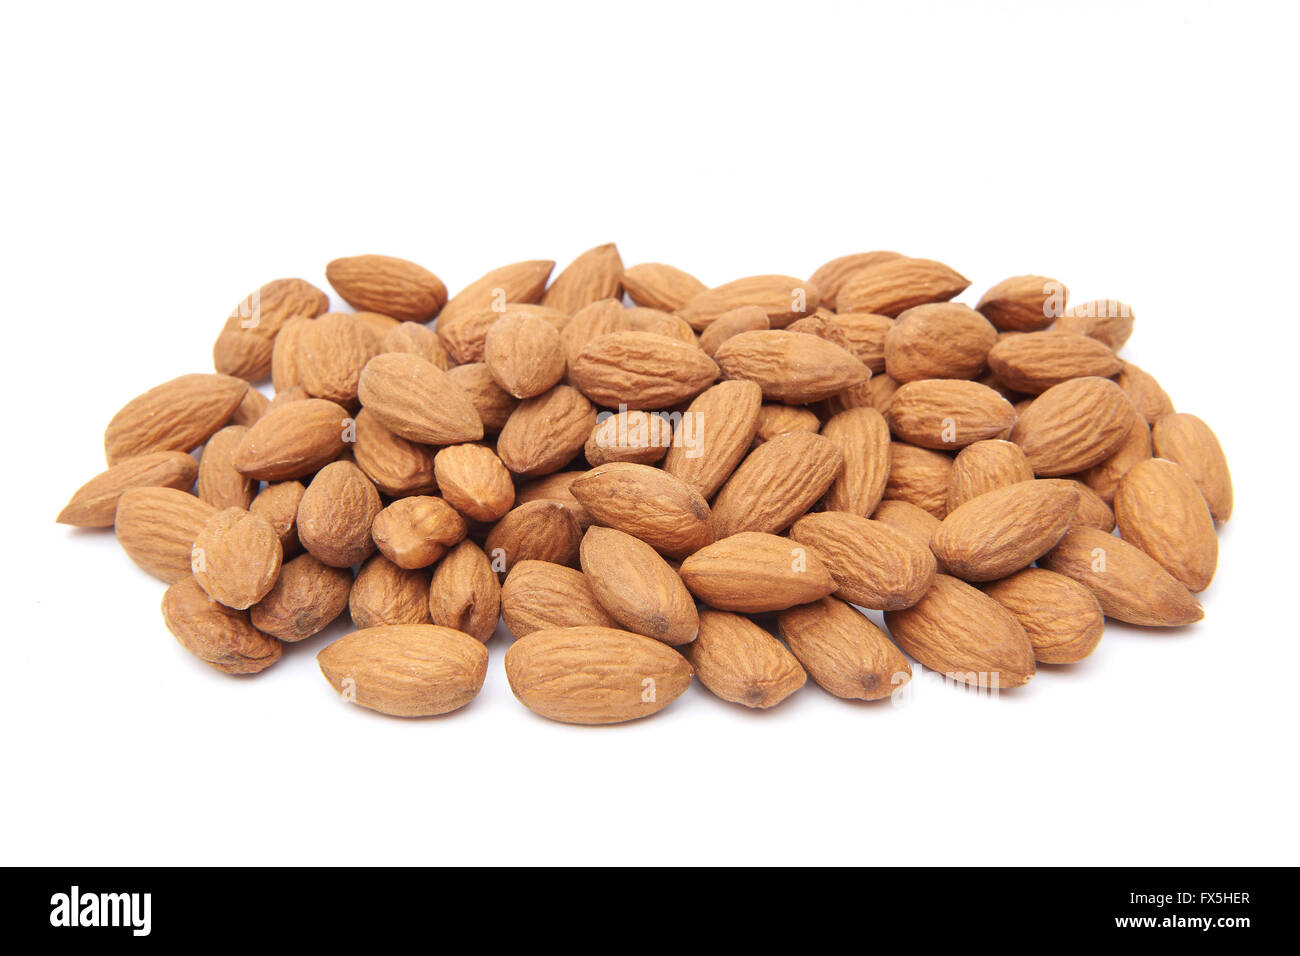 Closeup image of unshelled almonds isolated on a white background Stock Photo